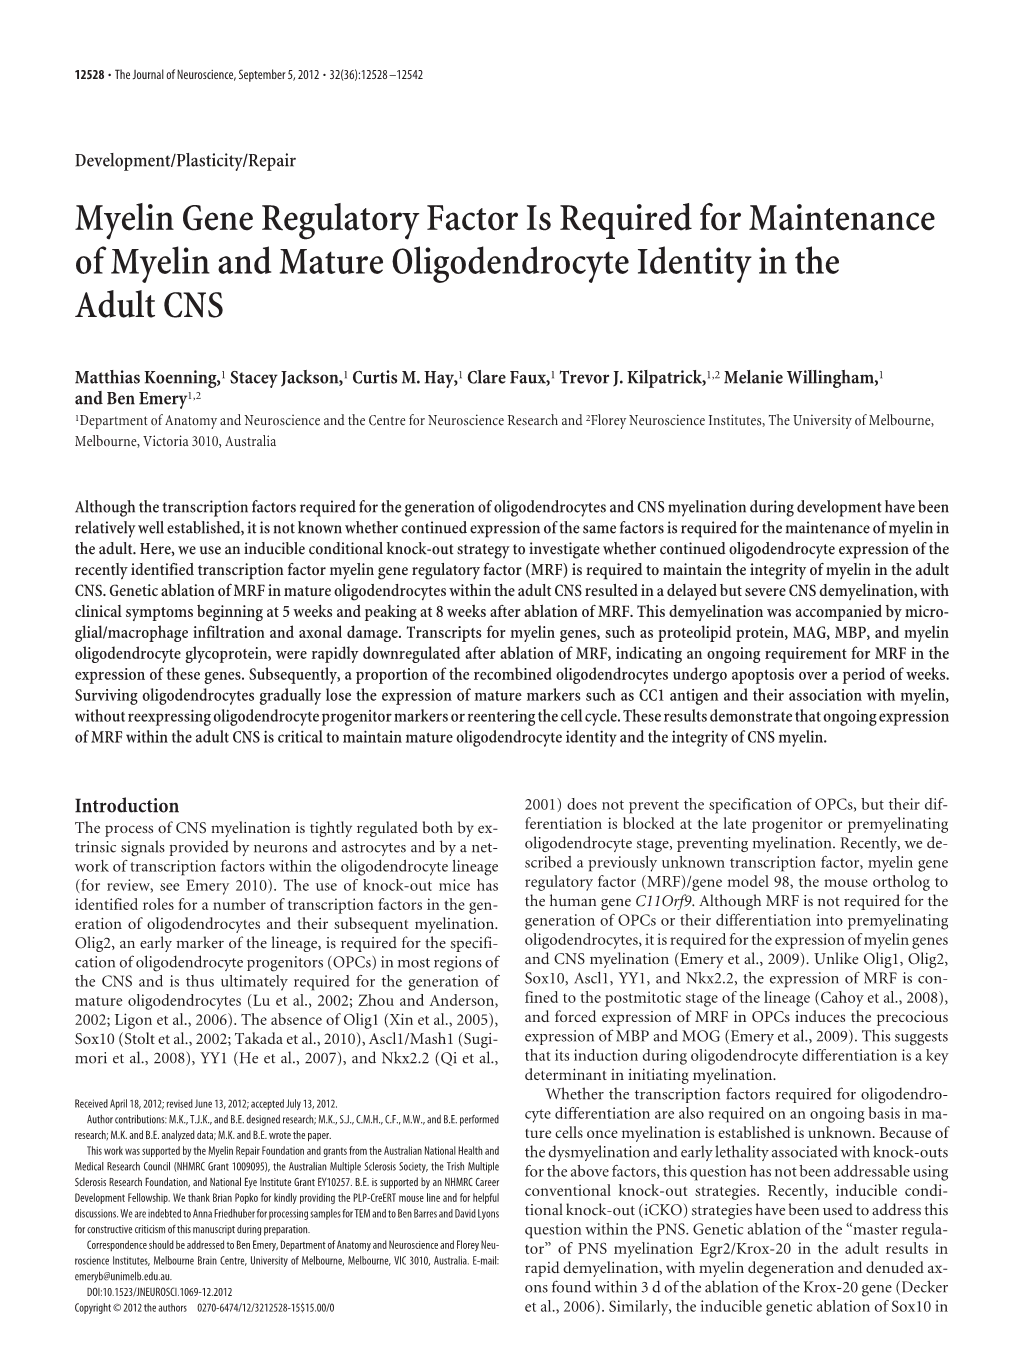 Myelin Gene Regulatory Factor Is Required for Maintenance of Myelin and Mature Oligodendrocyte Identity in the Adult CNS